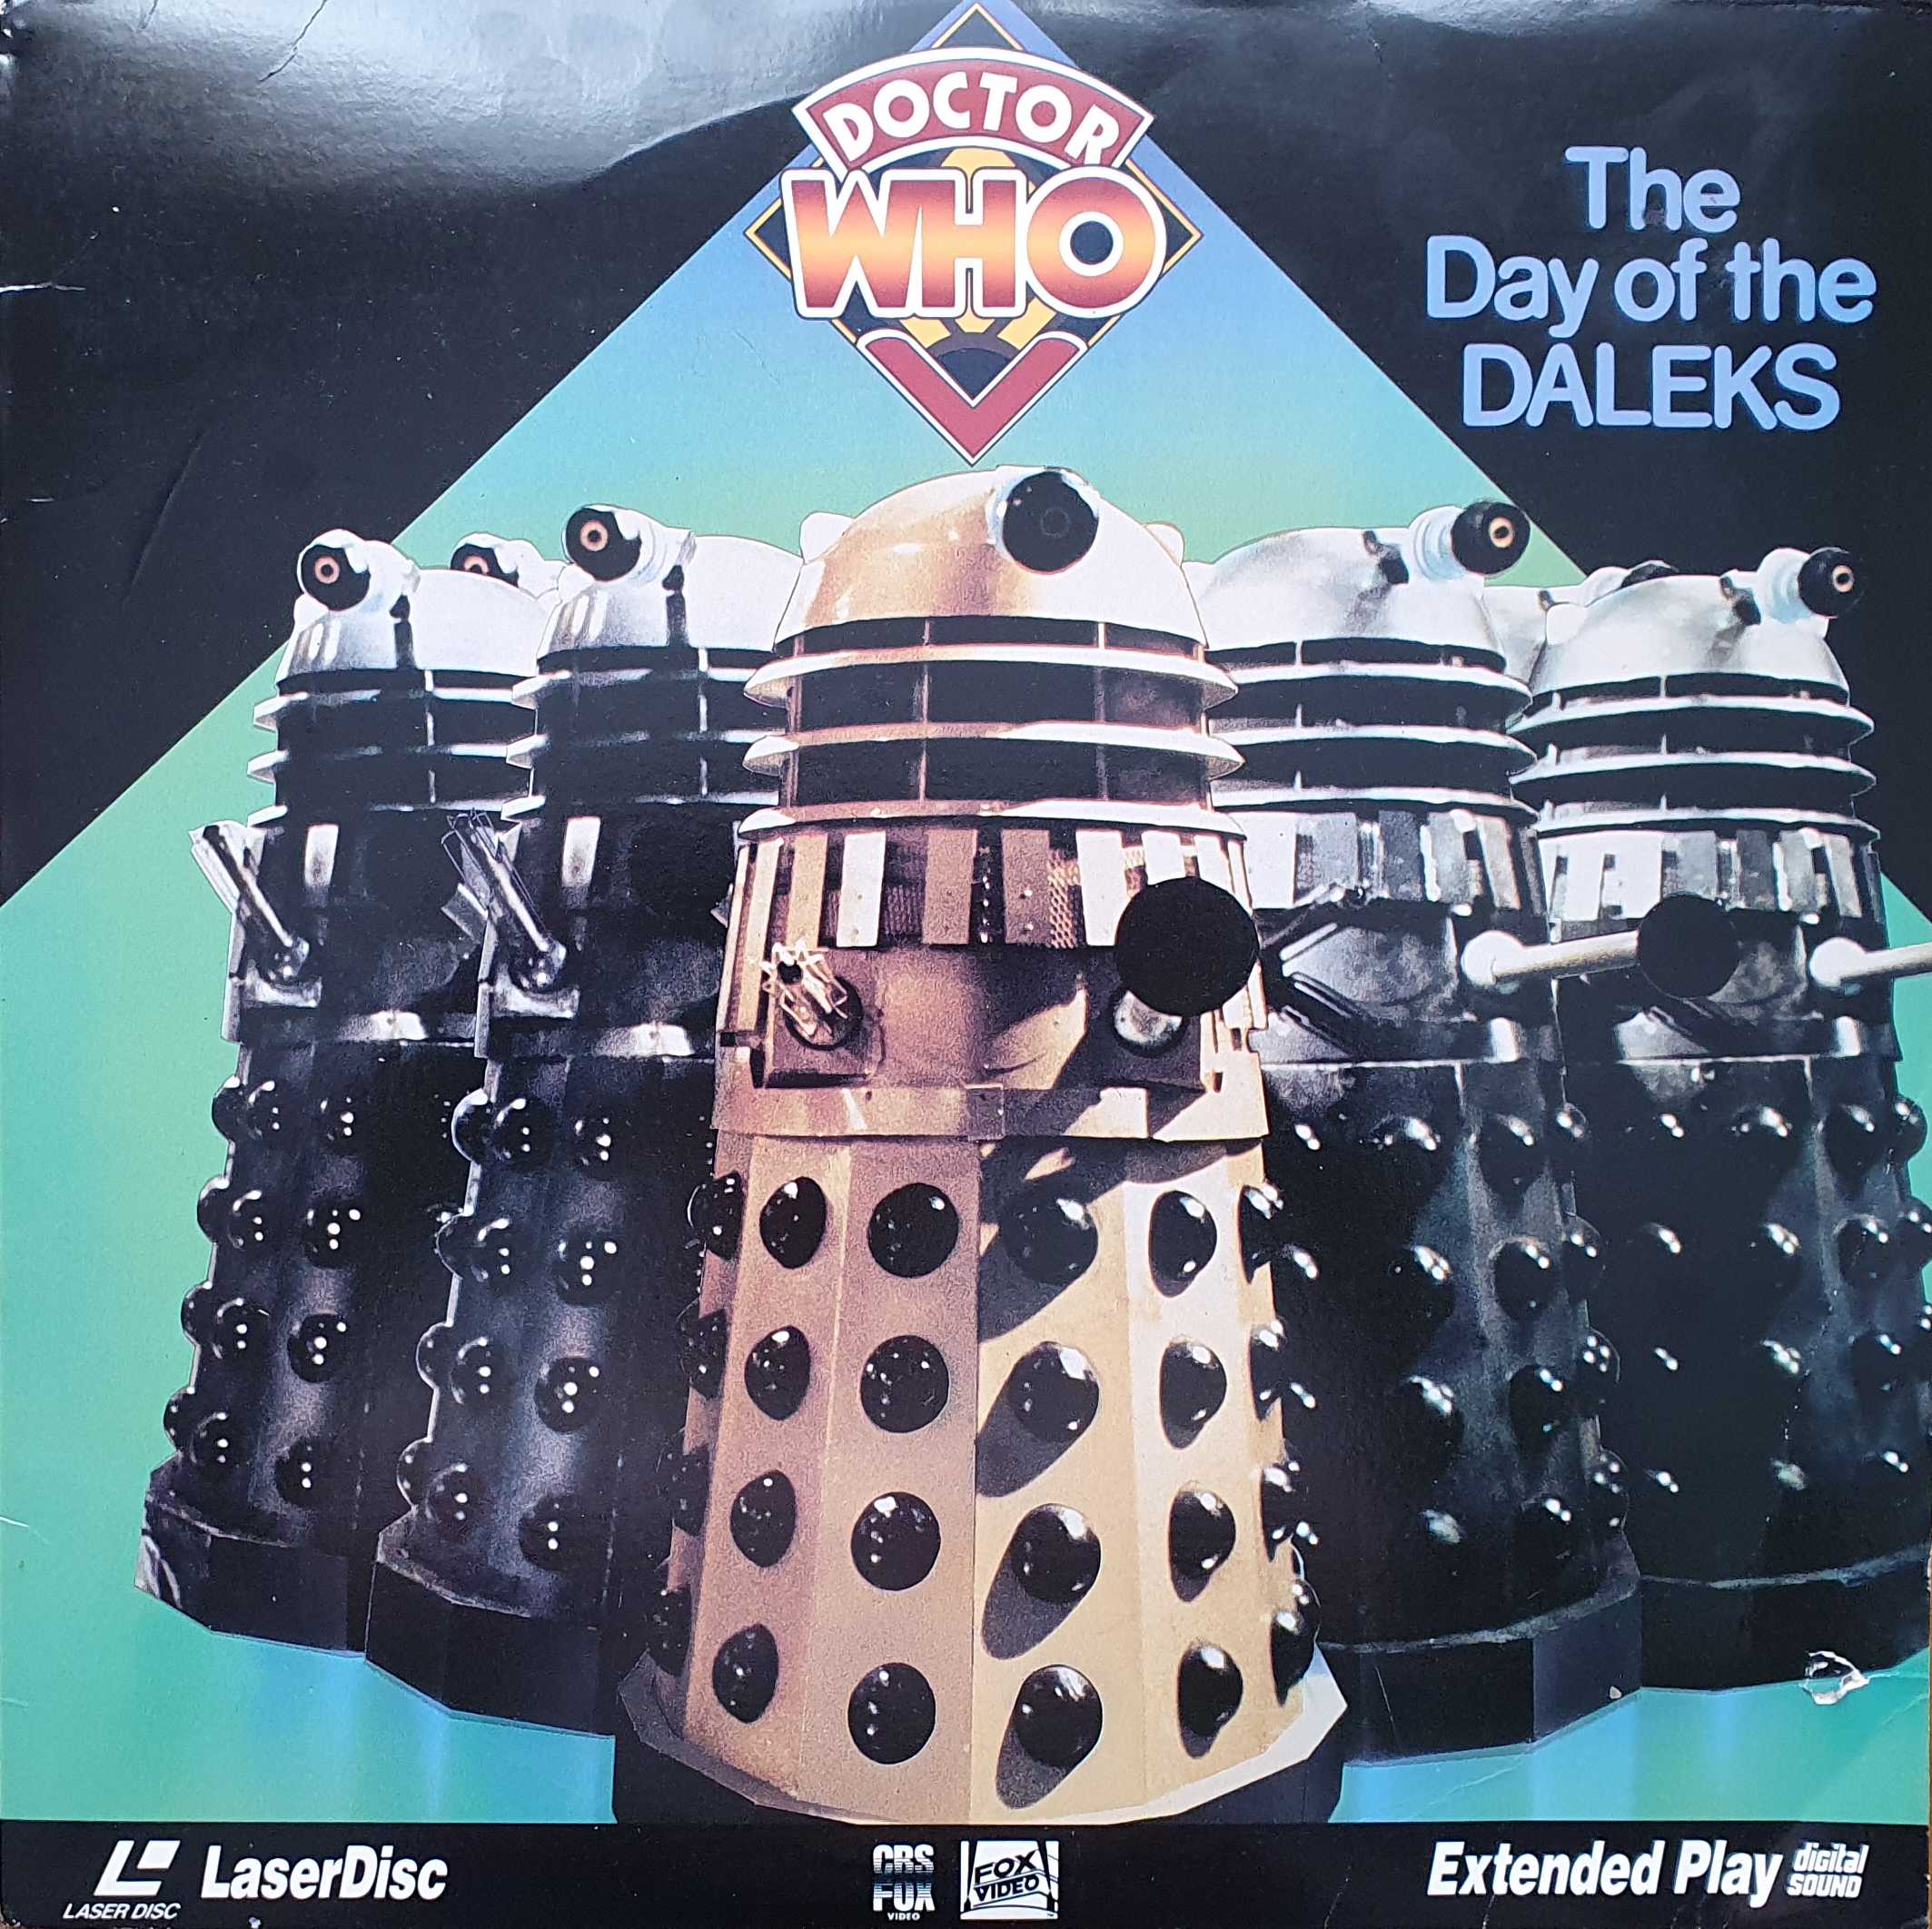 Picture of 5092 - 80 Doctor Who - The day of the Daleks (US import) by artist Louis Marks from the BBC anything_else - Records and Tapes library